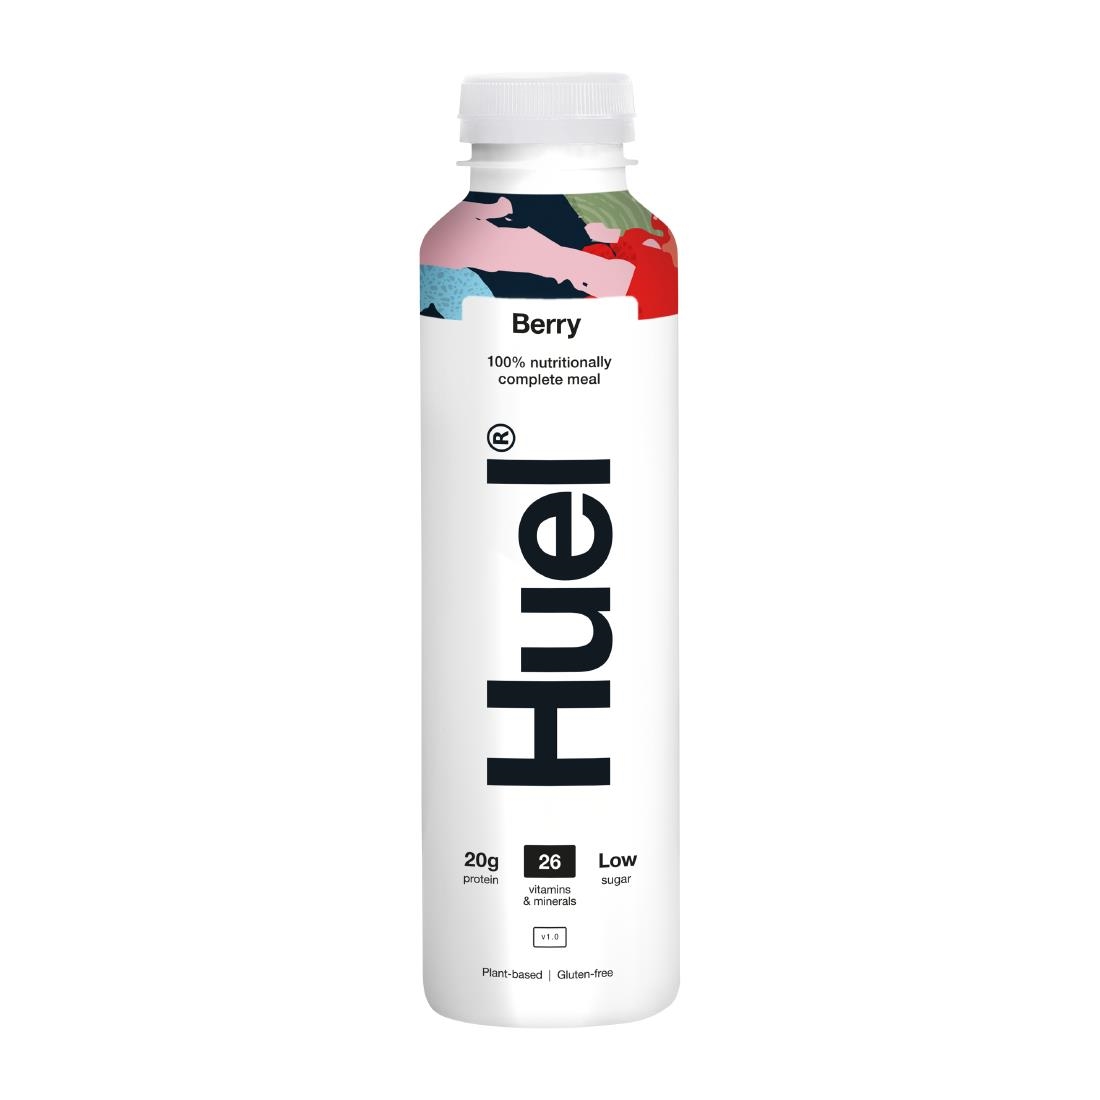 HUEL 100 Nutritionally Complete Meal Drink - Berry 500ml Pack of 8 (HS542)